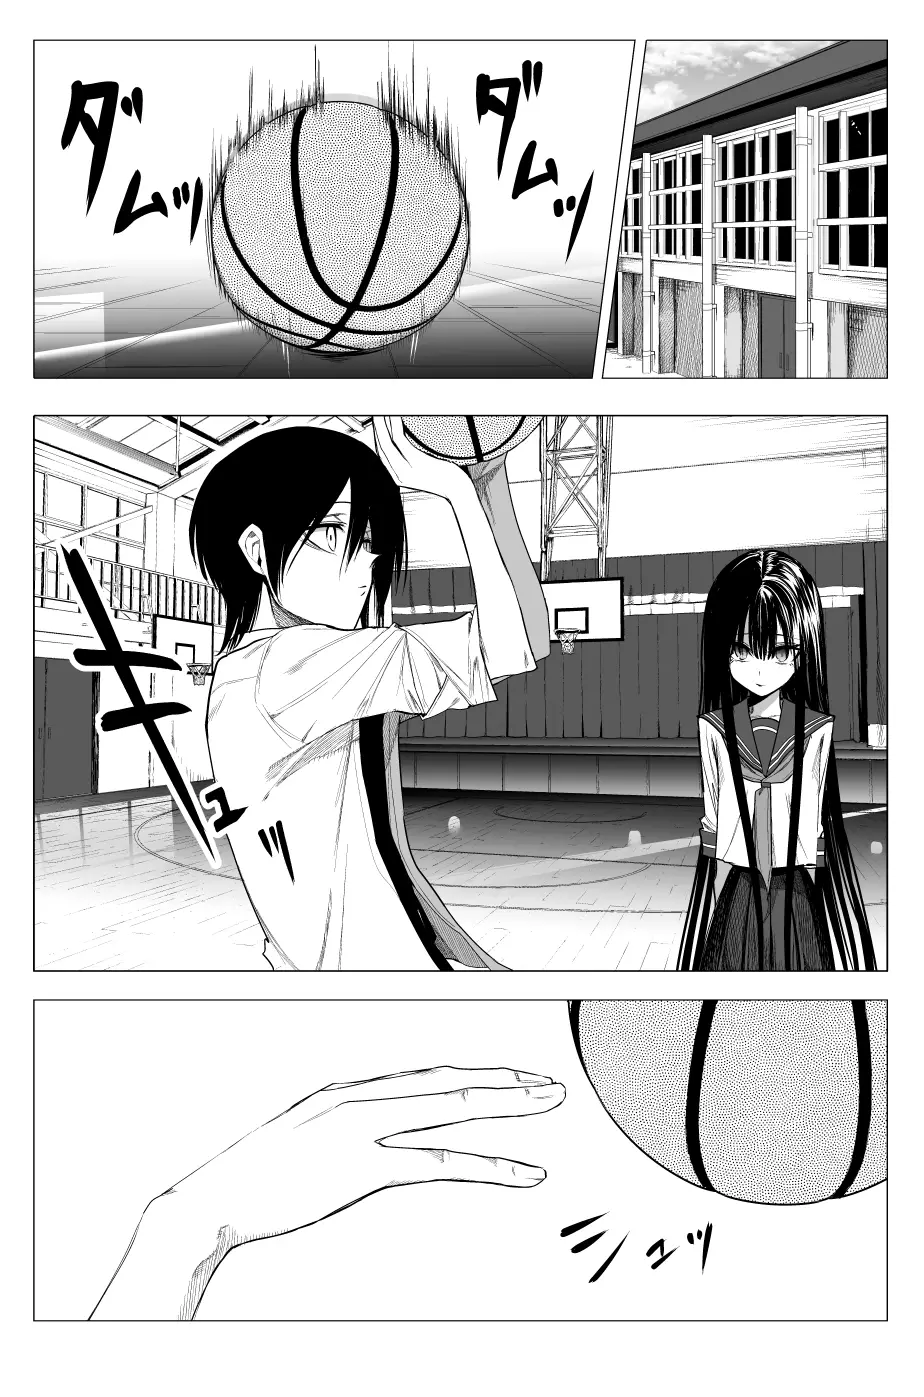 Mitsuishi-San Is Being Weird This Year - 34 page 2-e4ba54fc